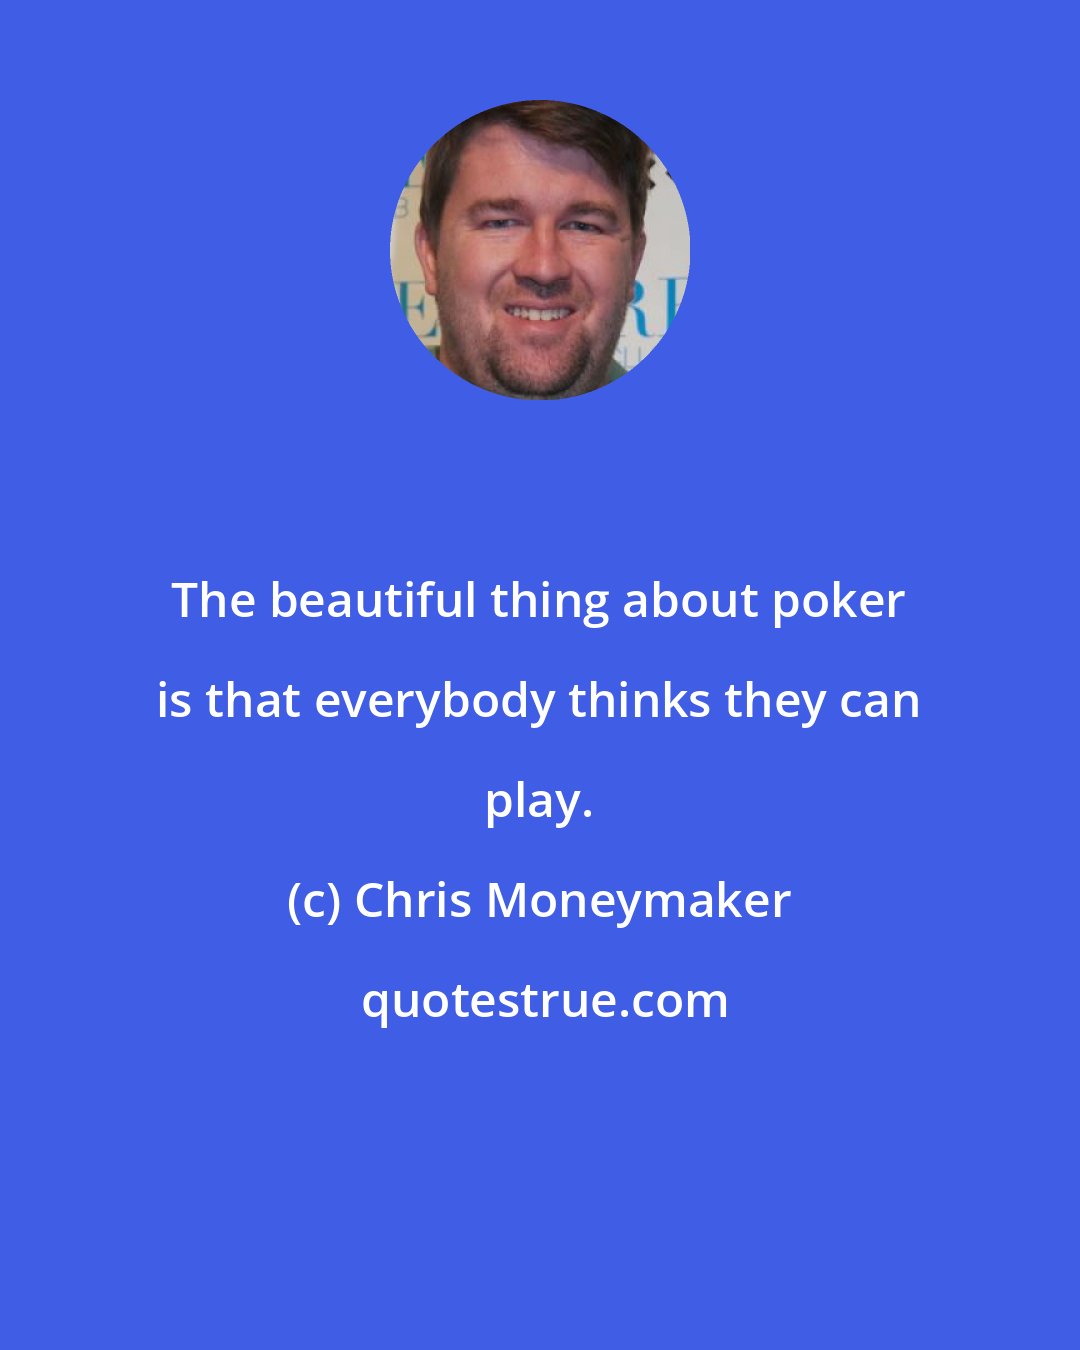 Chris Moneymaker: The beautiful thing about poker is that everybody thinks they can play.